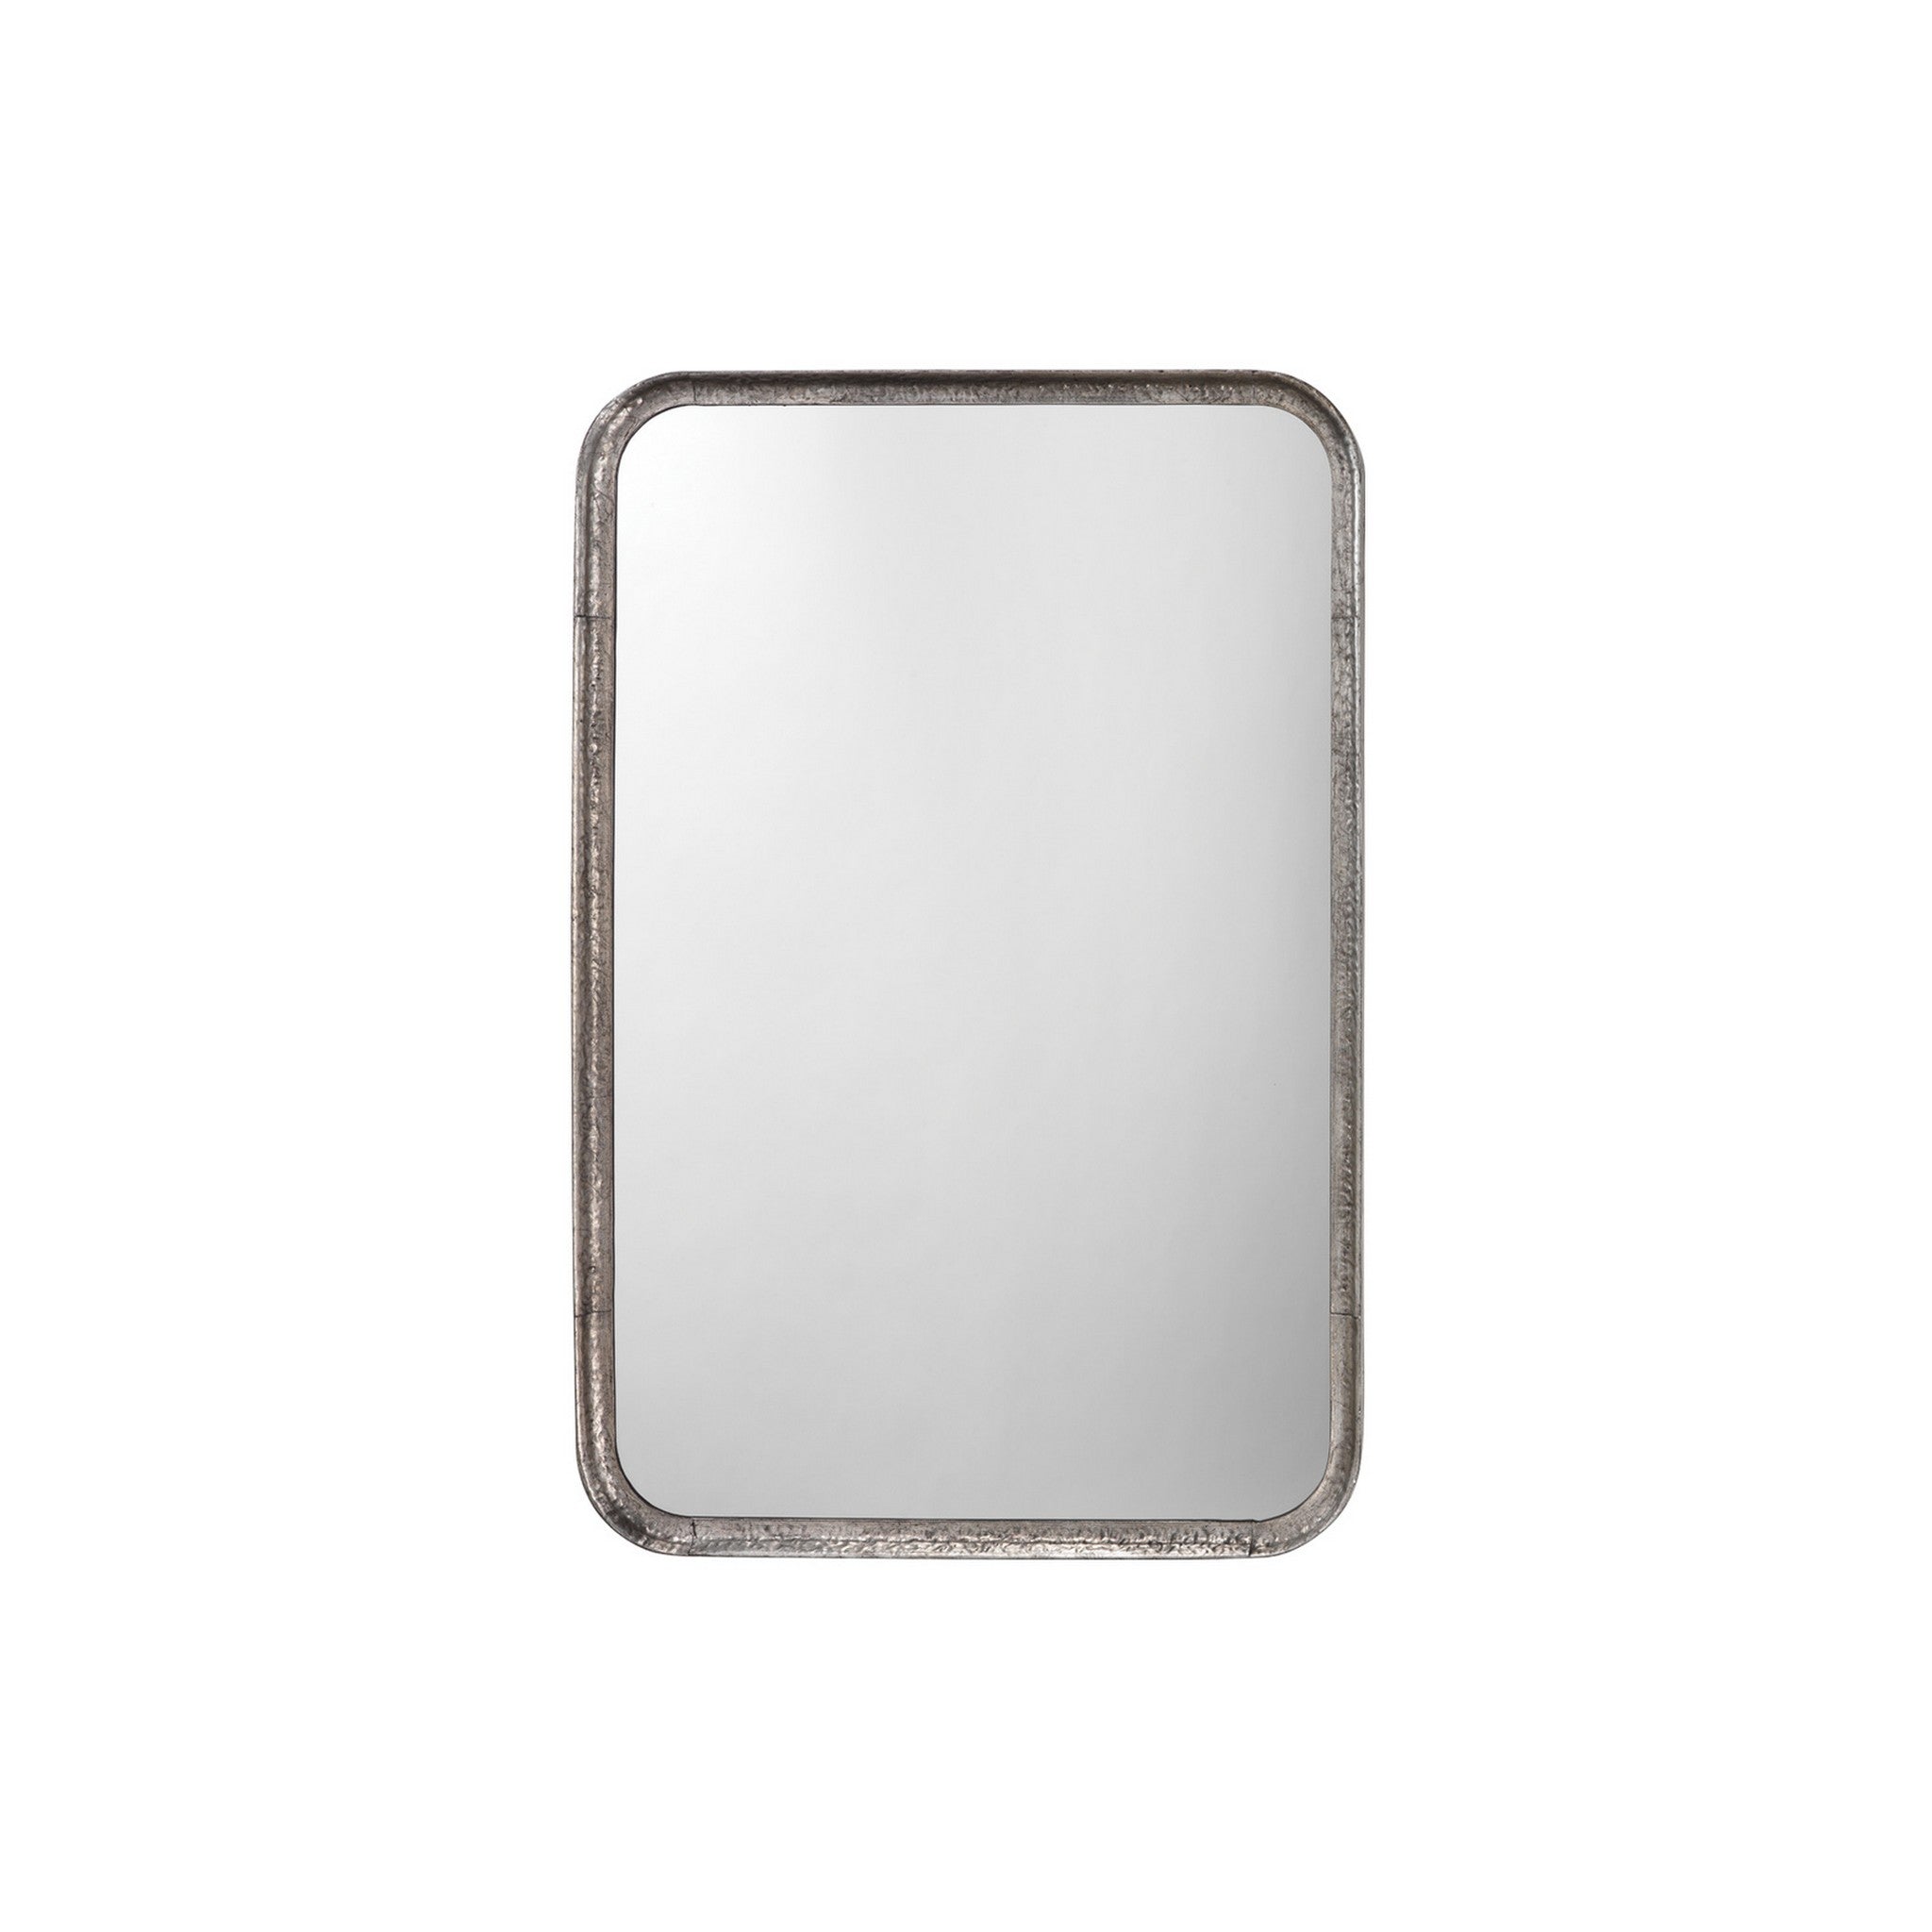 Jamie Young Co., Jamie Young Principle 24" x 36" Rectangular Vanity Mirror With Silver Leaf Metal Frame